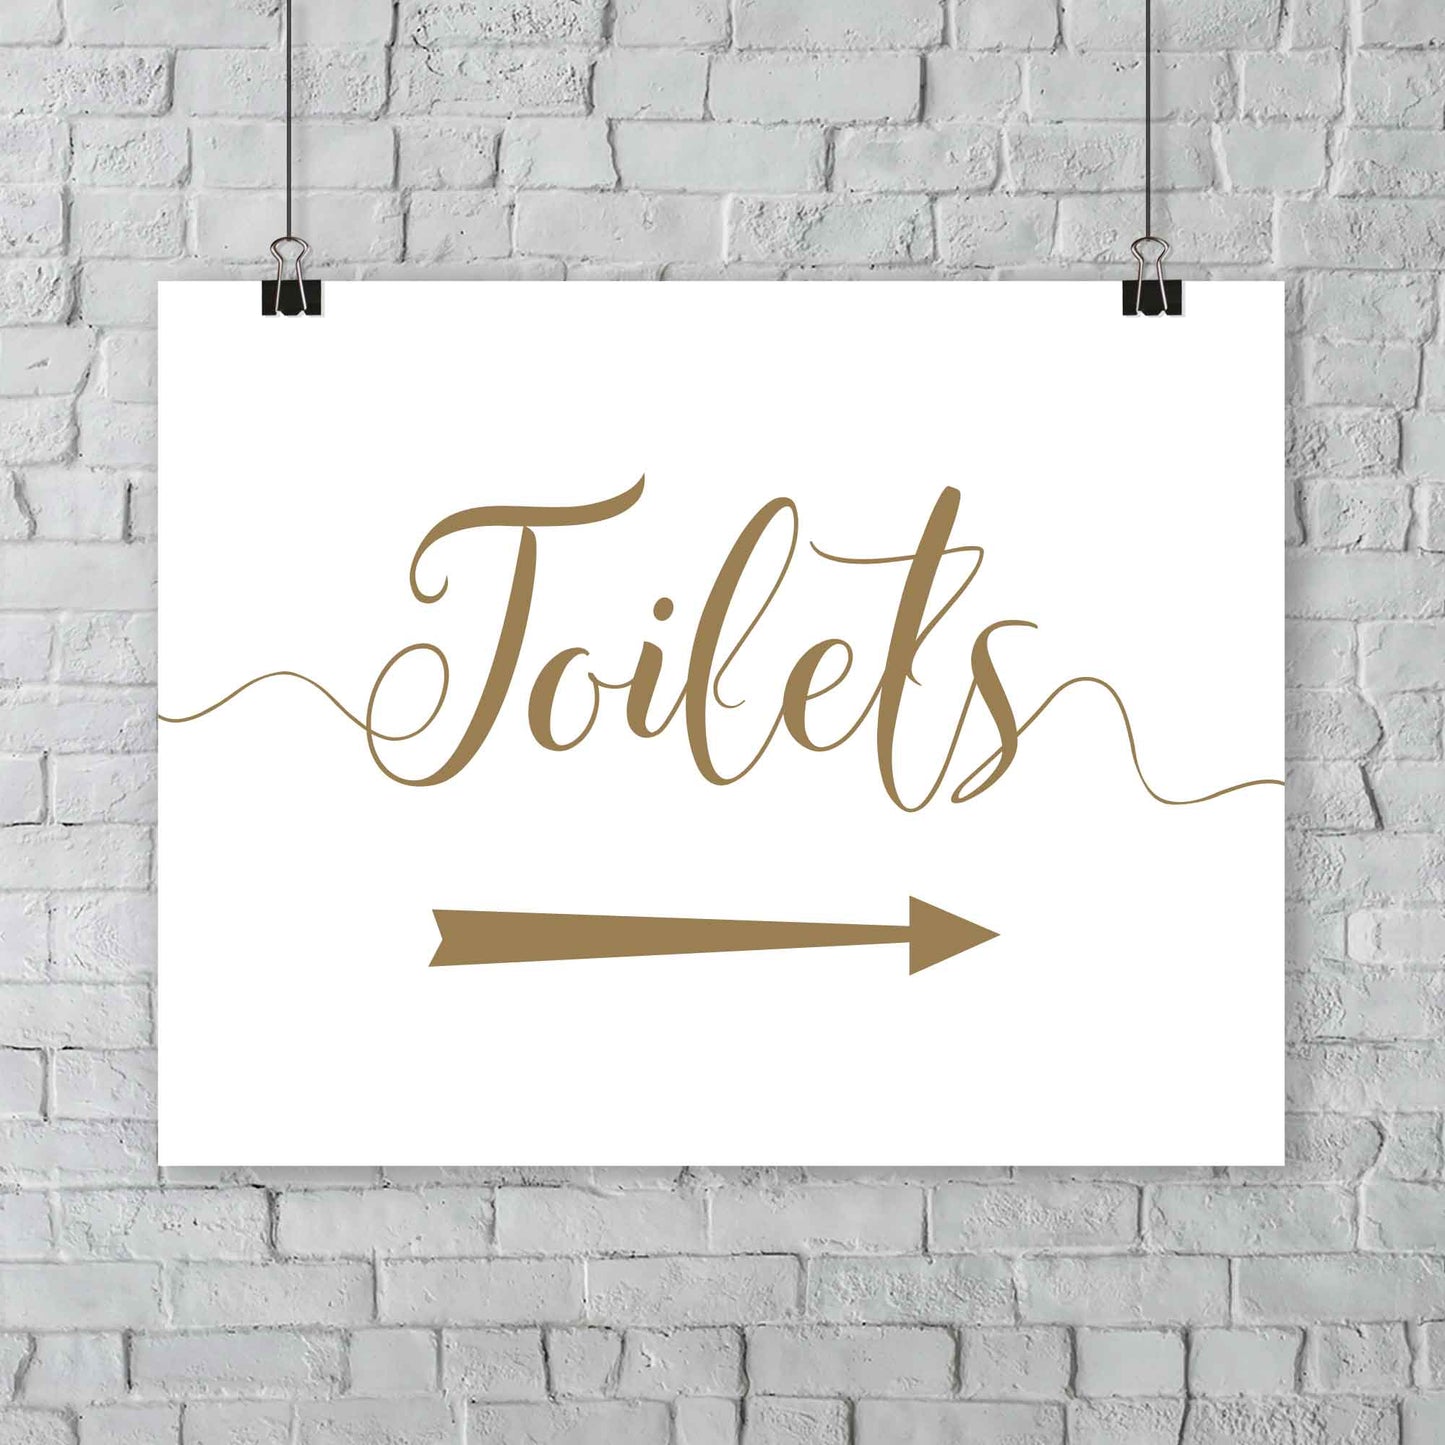 gold toilets arrow sign at outdoor wedding